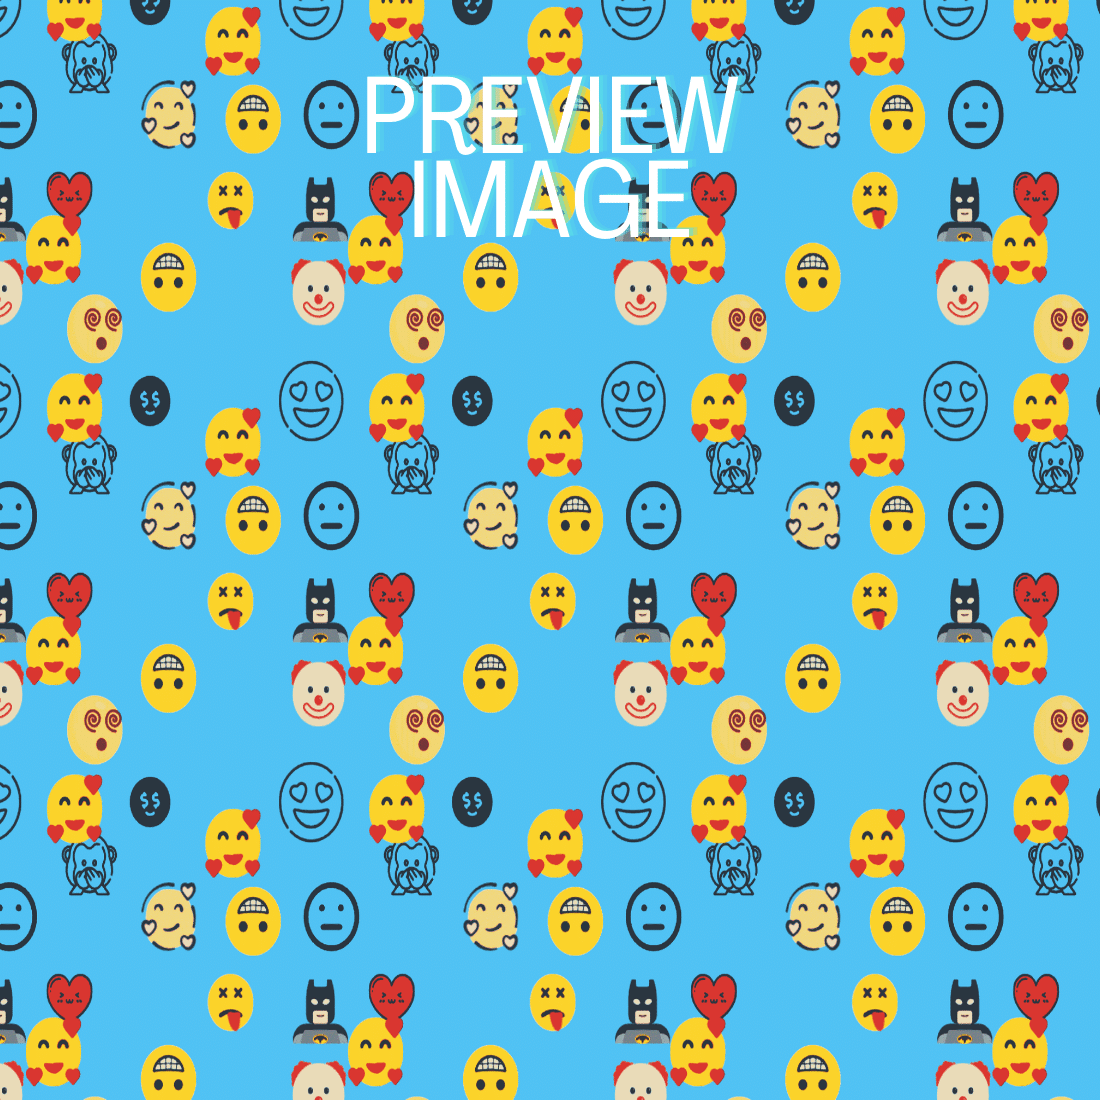 4K Quality Emojis Pattern For Your Business cover image.